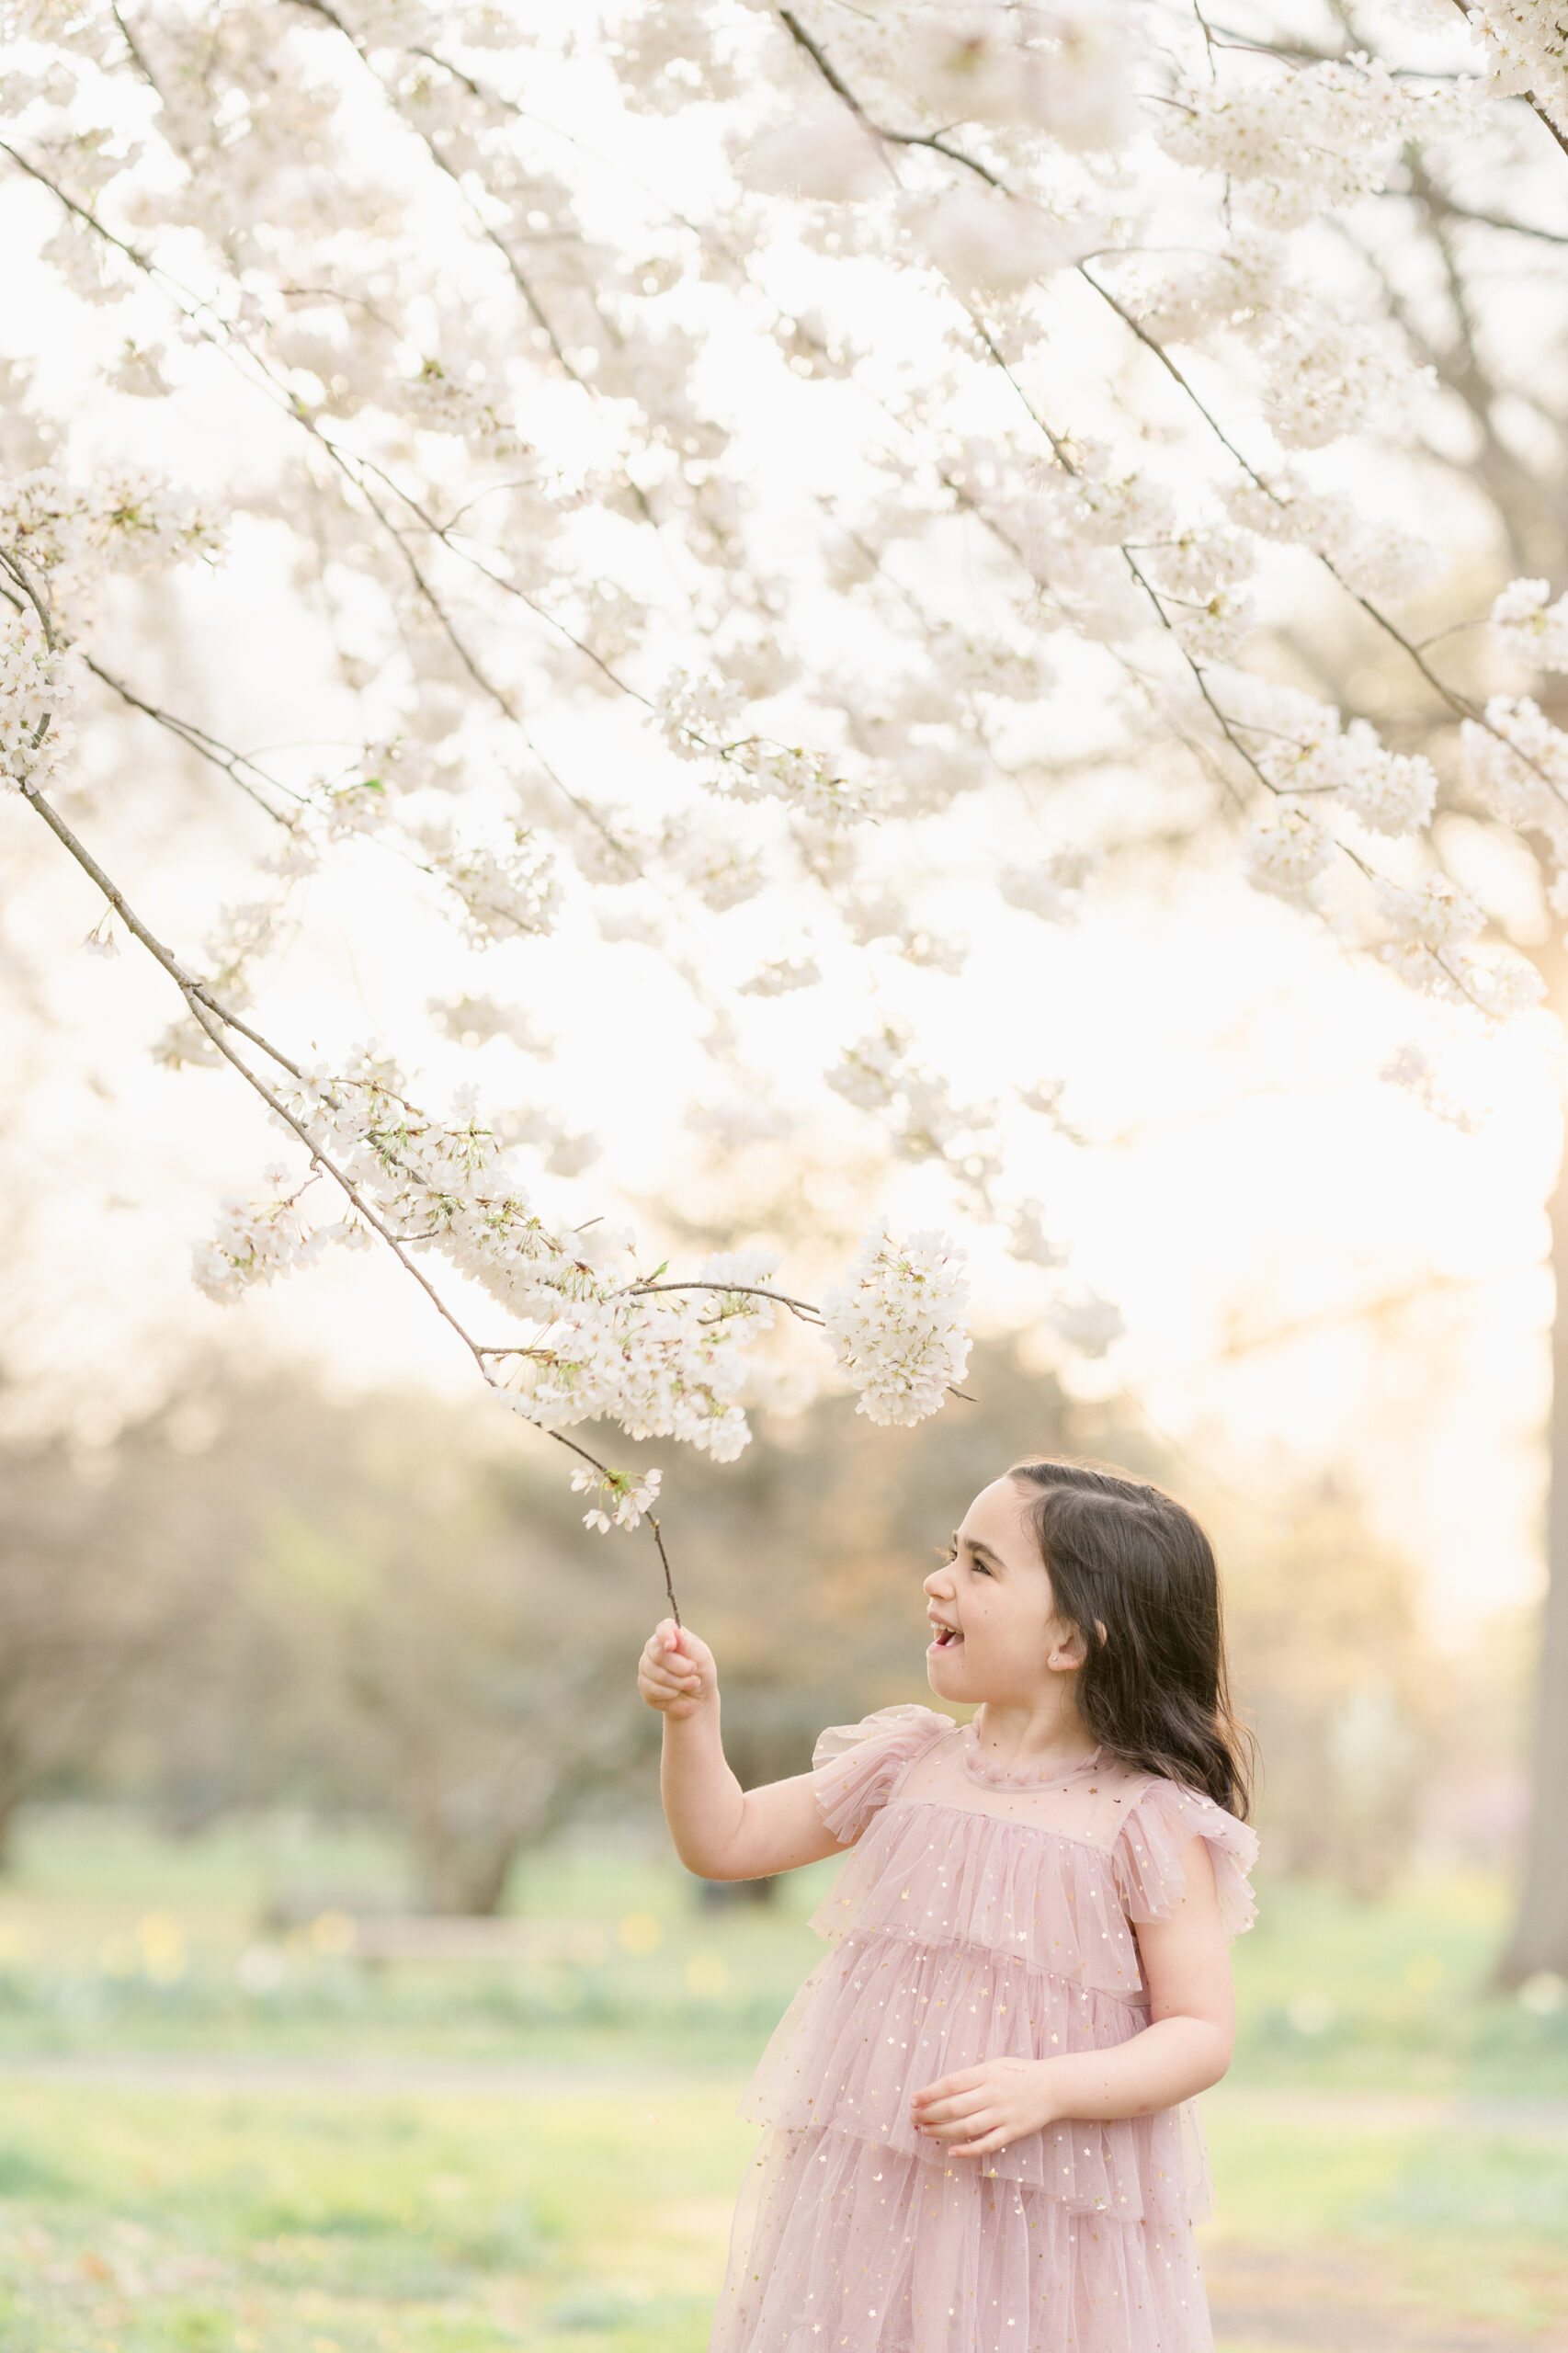 A little girl wearing a pink tulle dress tugs on a fluffy white cherry blossom branch and smiles.